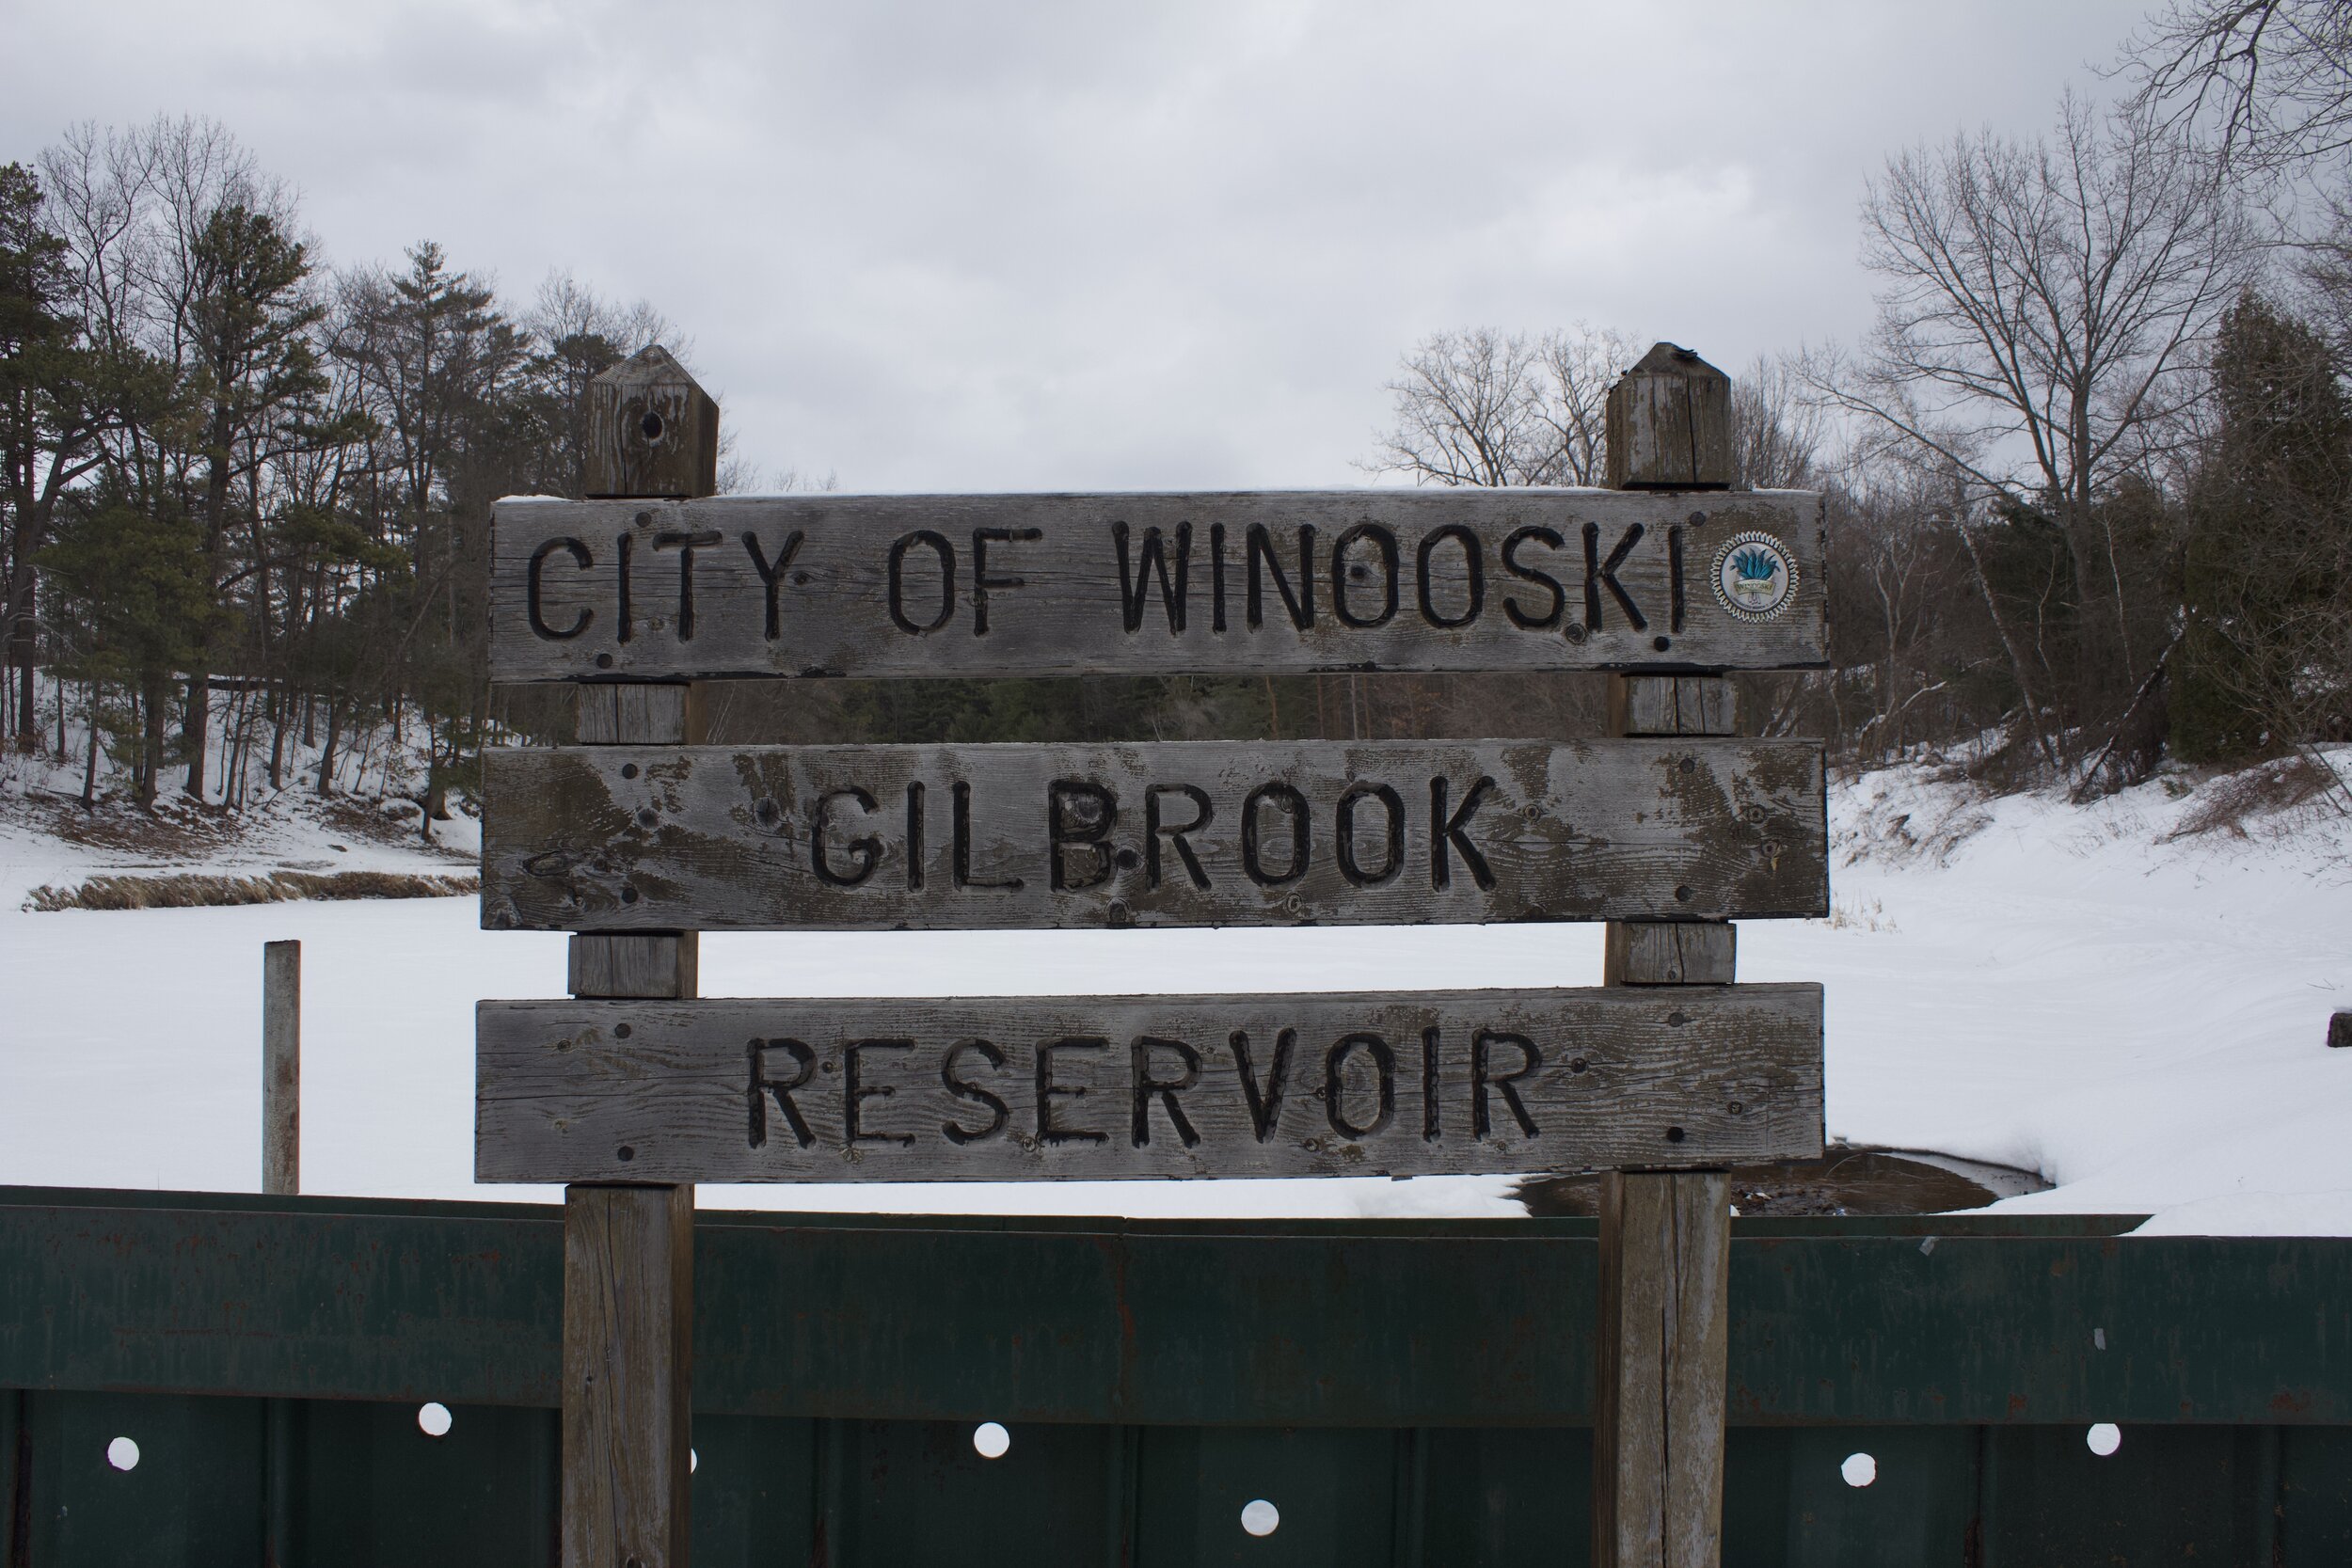   Gilbrook Park in Winooski is the hub of free cross country skiing on Saturdays from 10AM-1PM.  